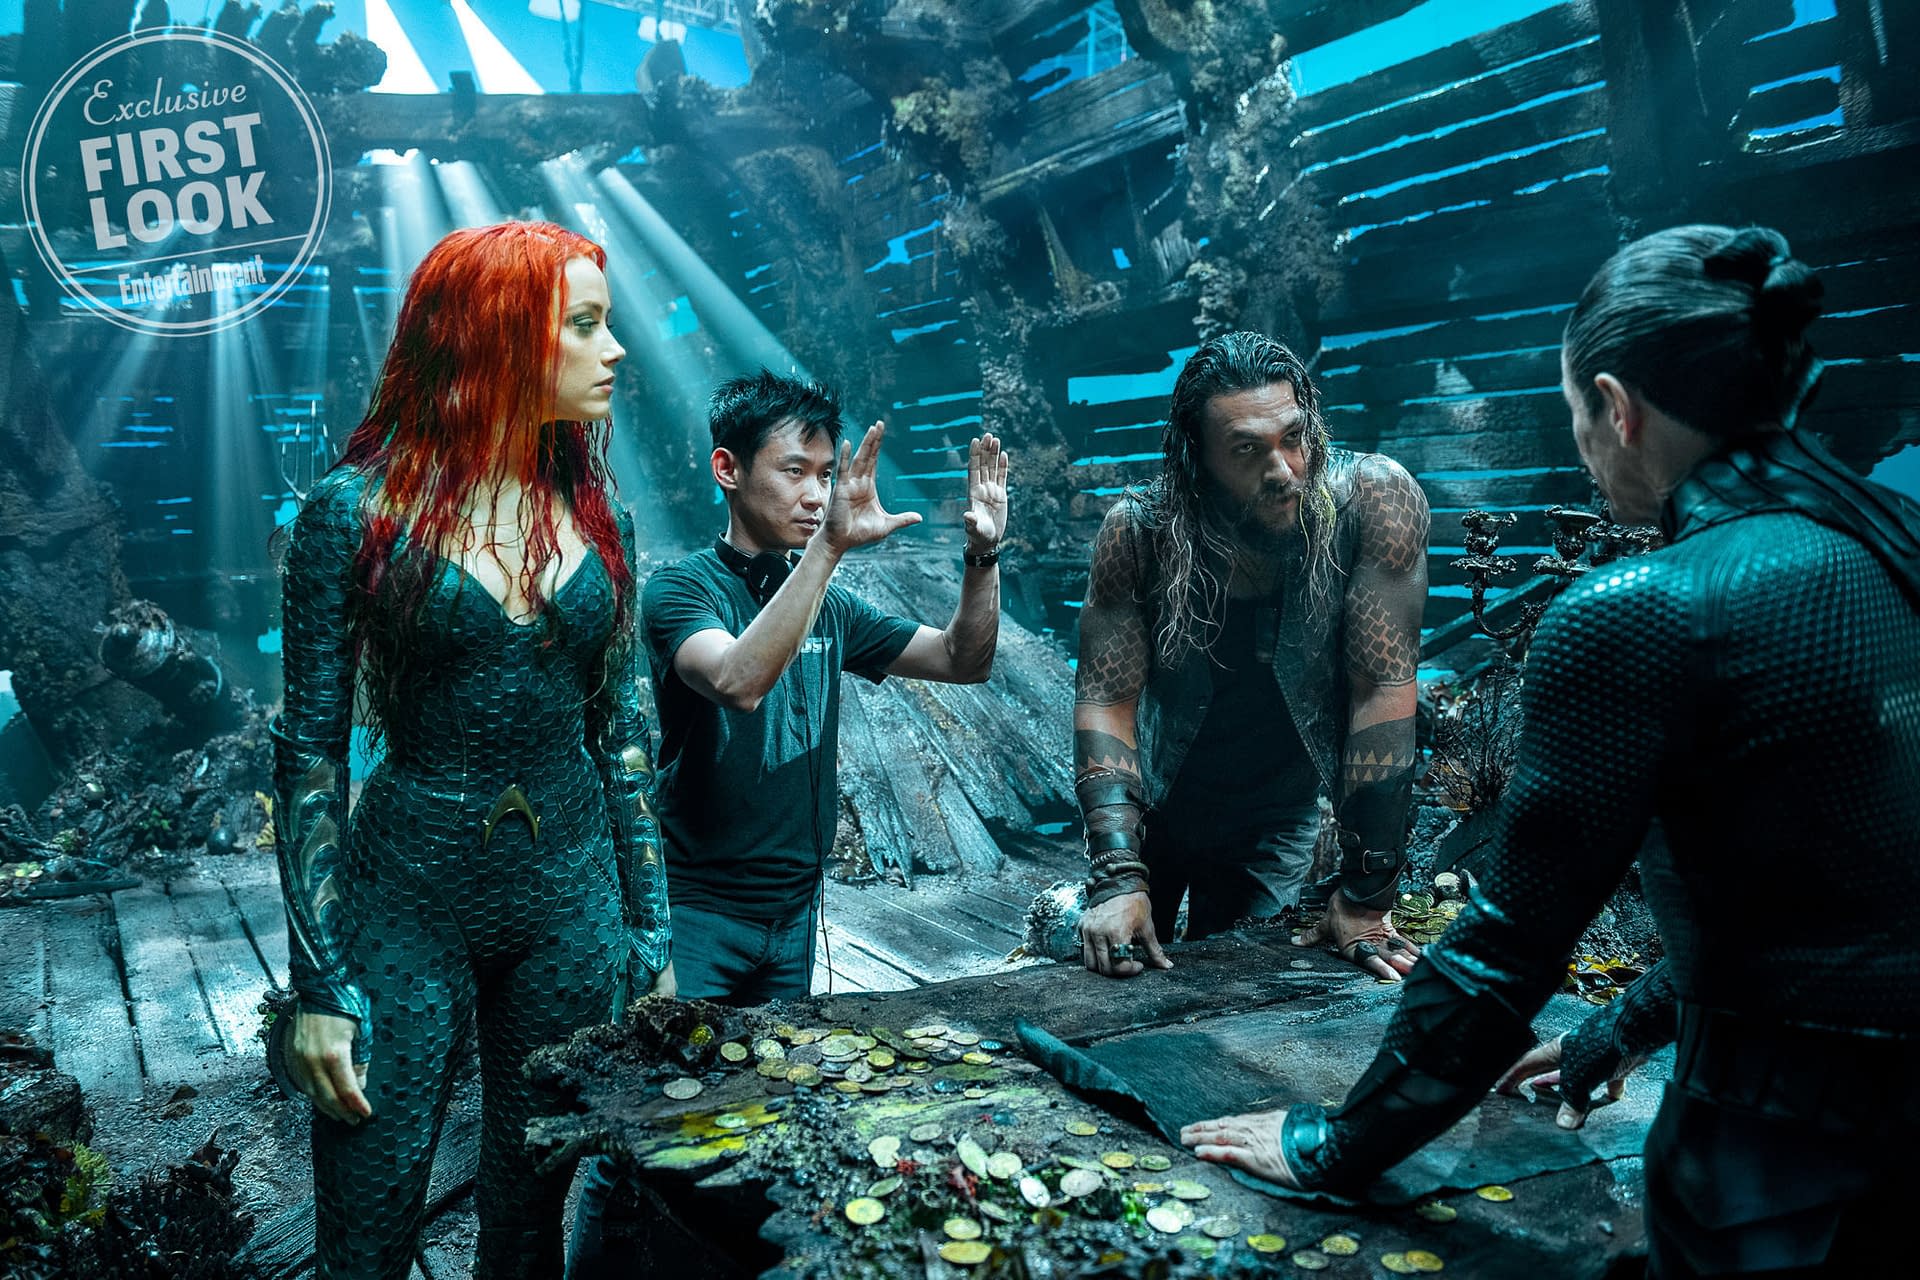 James Wan Talks About Keeping Aquaman a Self-Contained Film